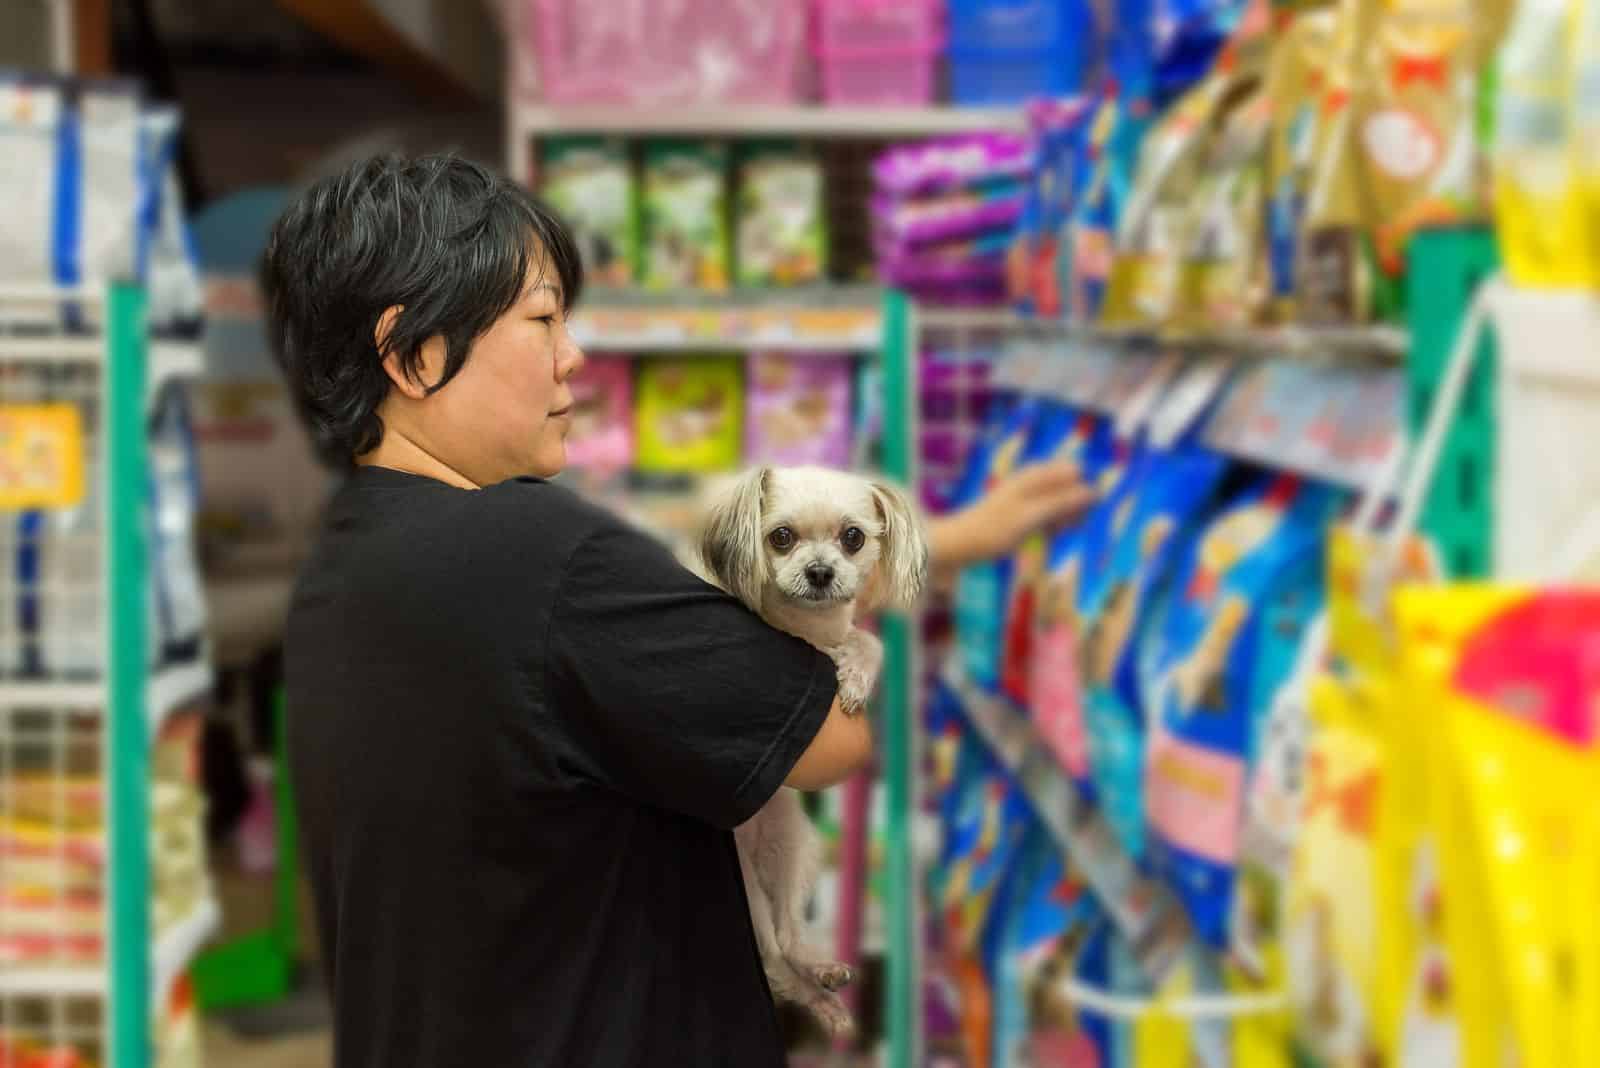 the woman looks at the dog food